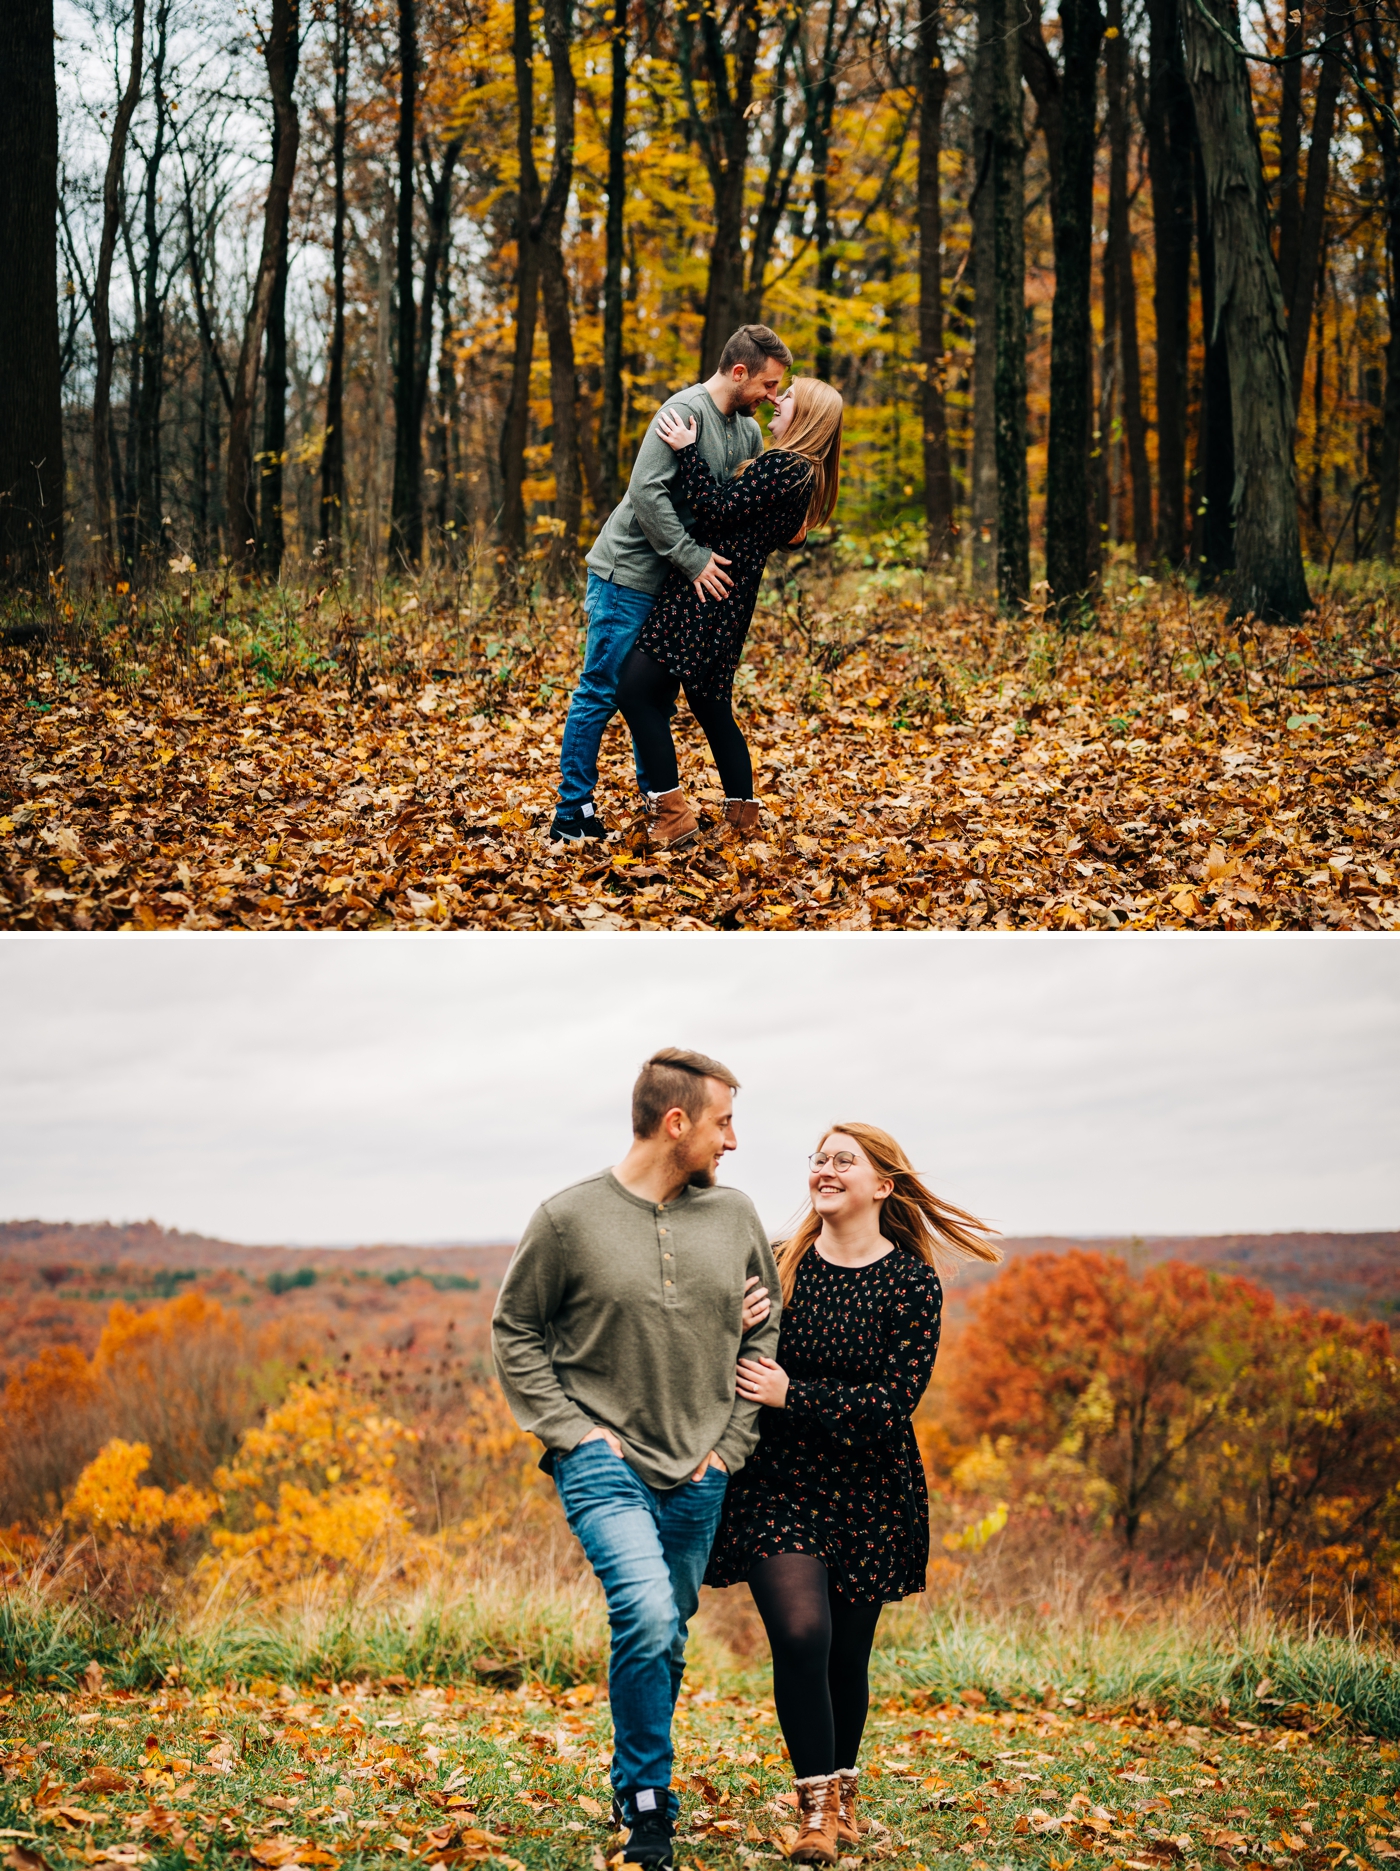 Engagement session outfit ideas